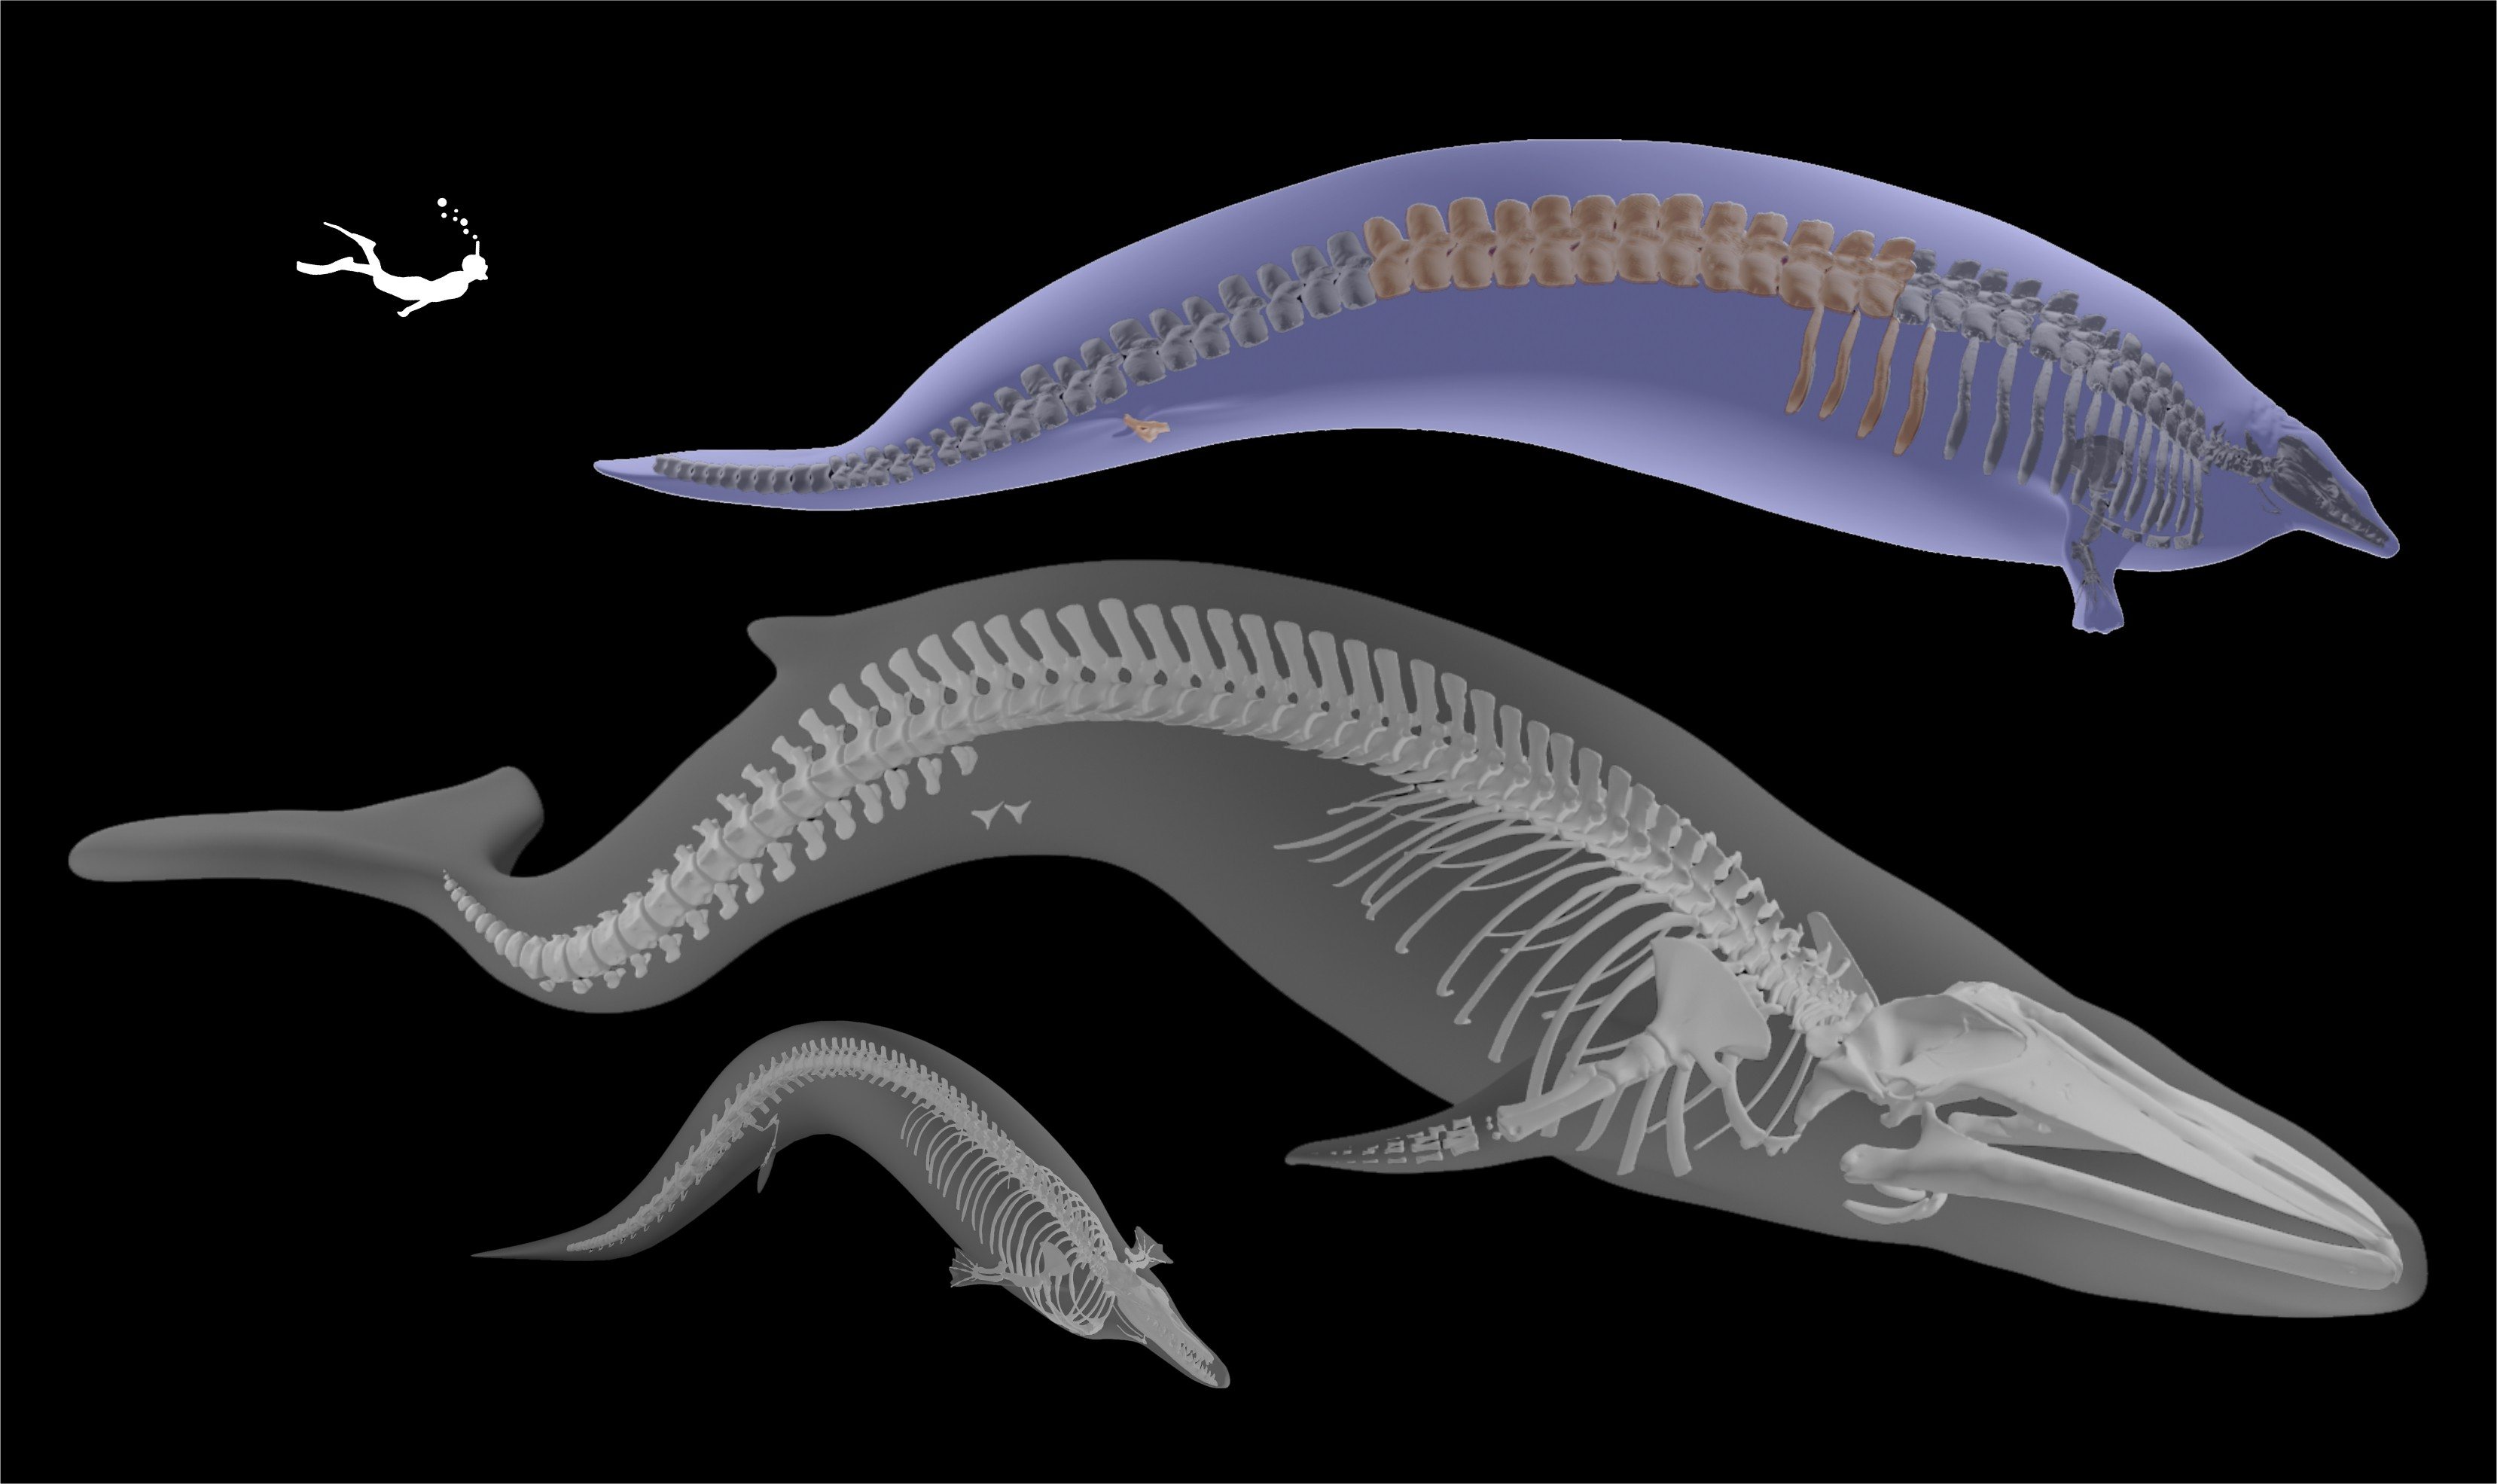 3D model of the fleshed out skeleton of the new species, Perucetus colossus (estimated body length: ~20 meters), along with that of a smaller, close relative (Cynthiacetus peruvianus) and the Wexford blue whale (exhibited at the Natural History Museum in London)